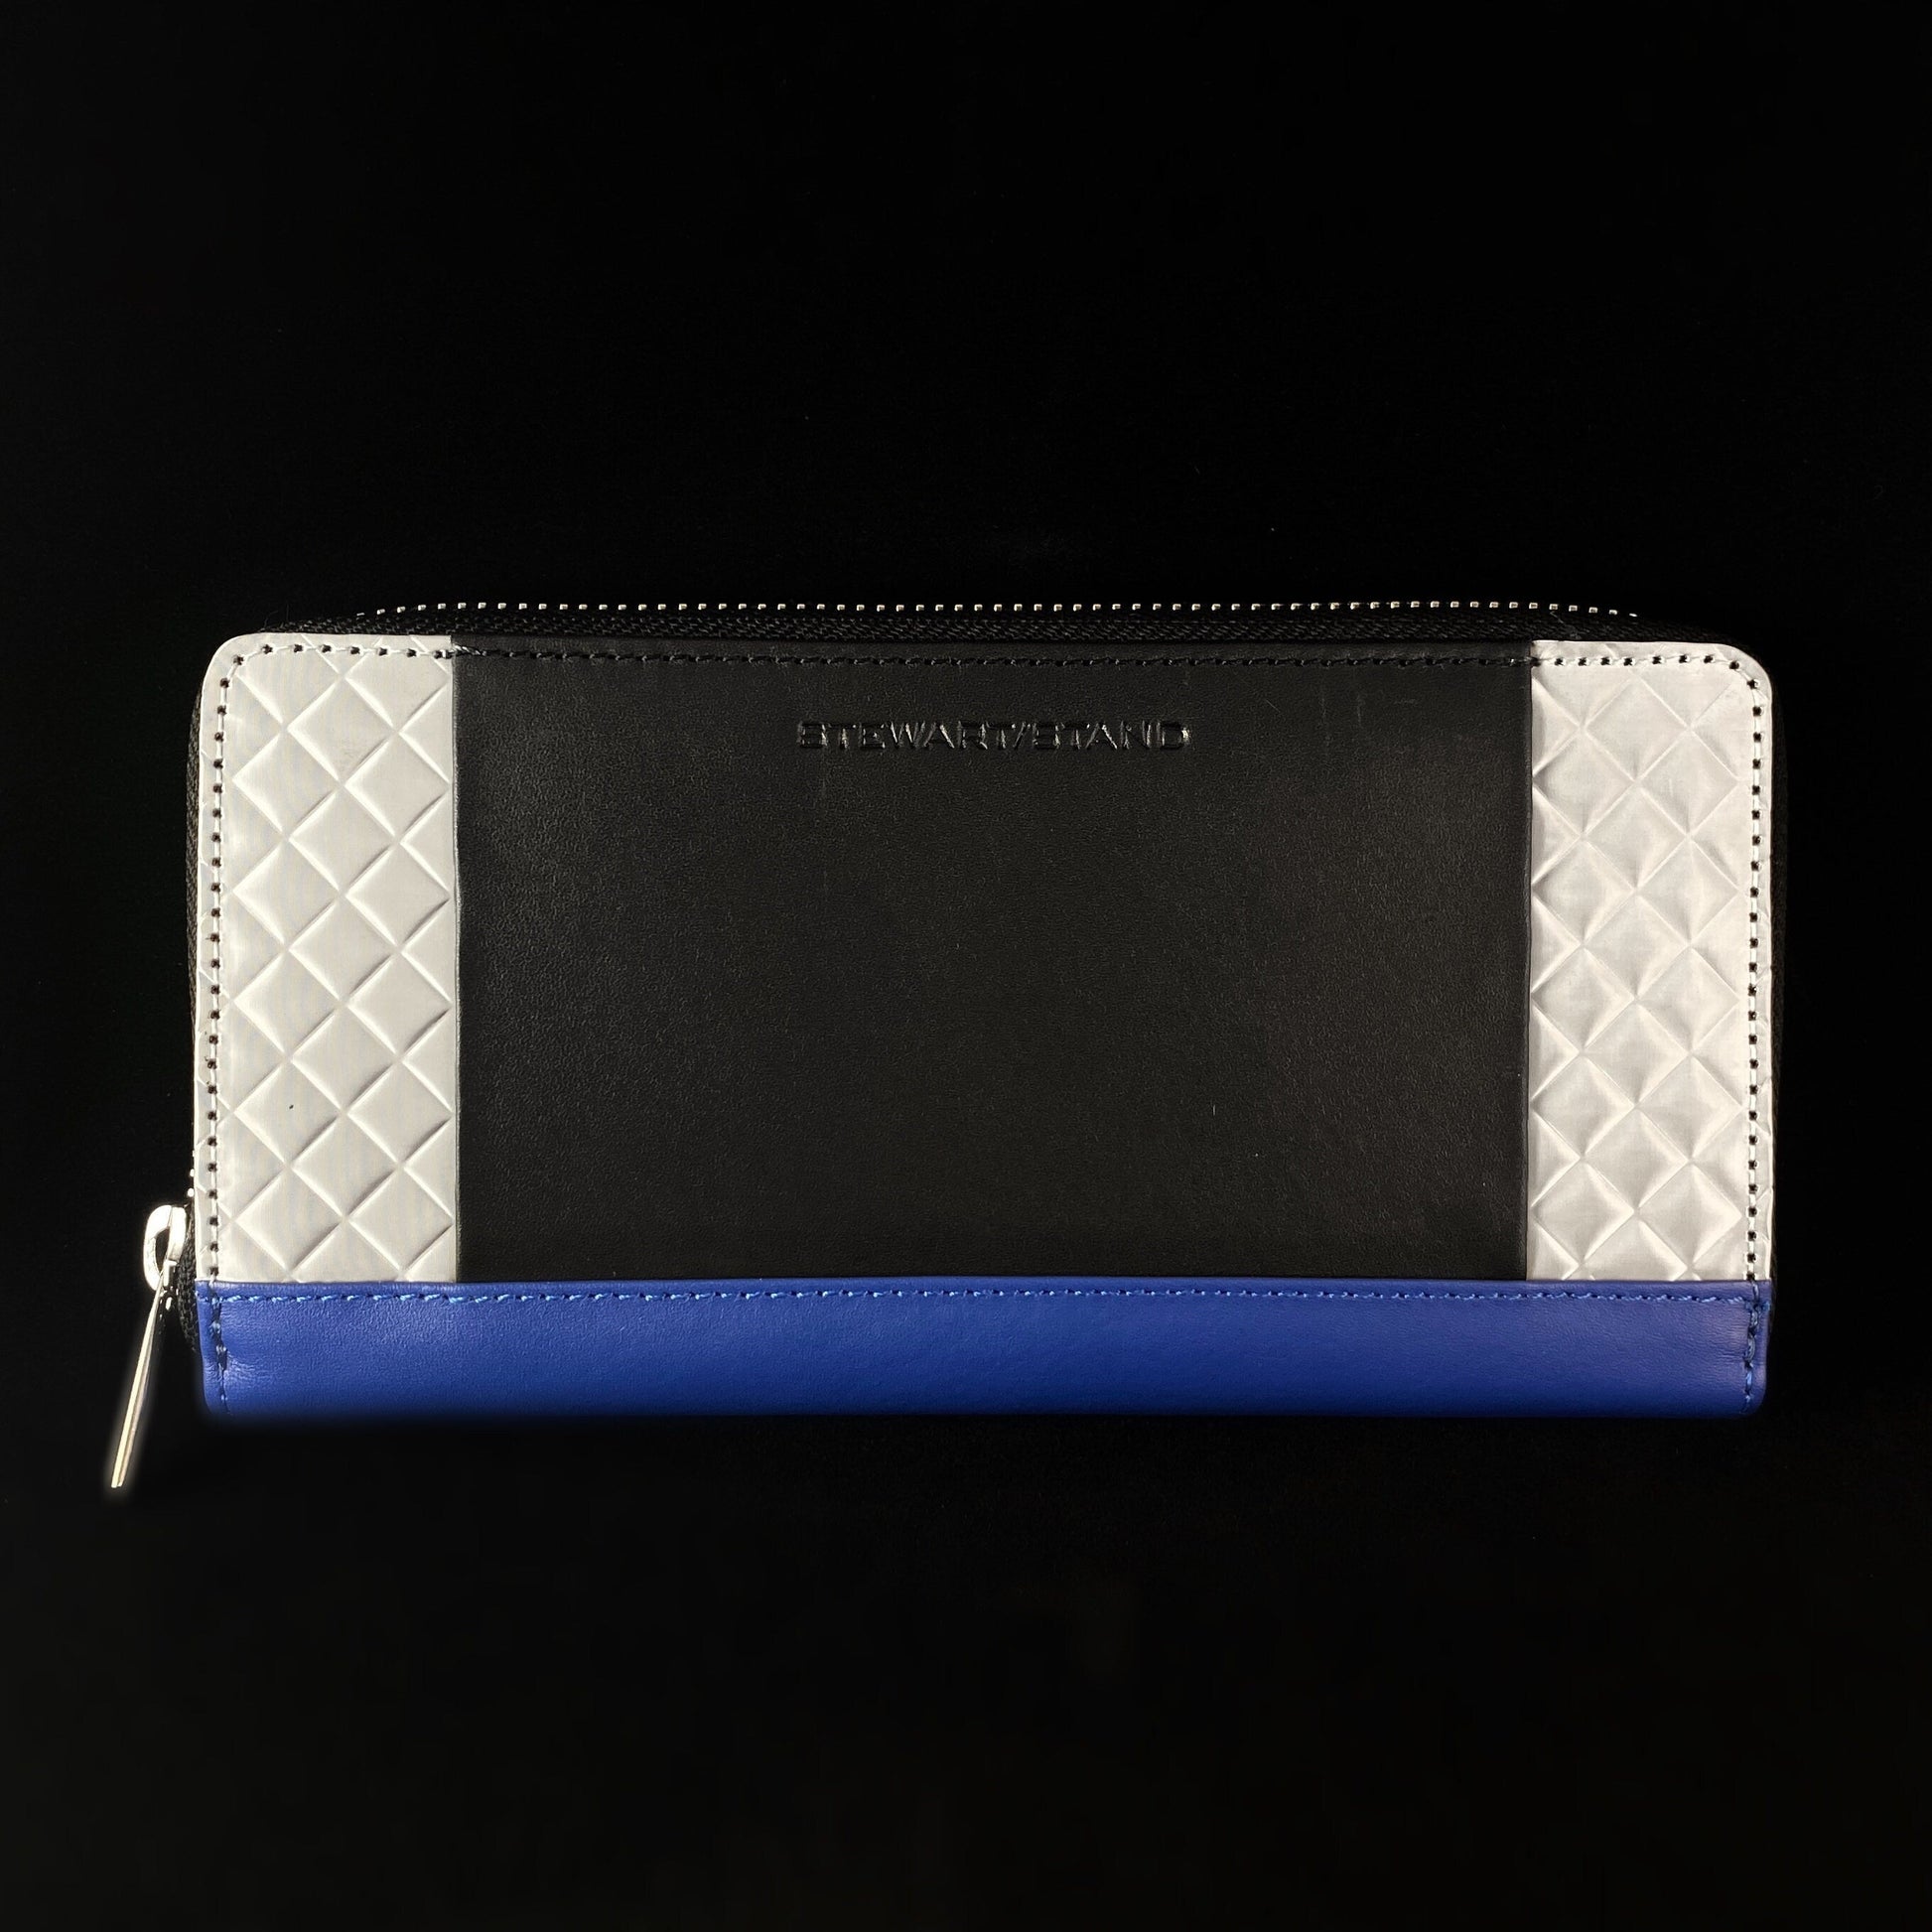 Leather and Stainless Steel RFID Protection Zipper Wallet, Cobalt Blue, Black, Silver - Stewart Stand